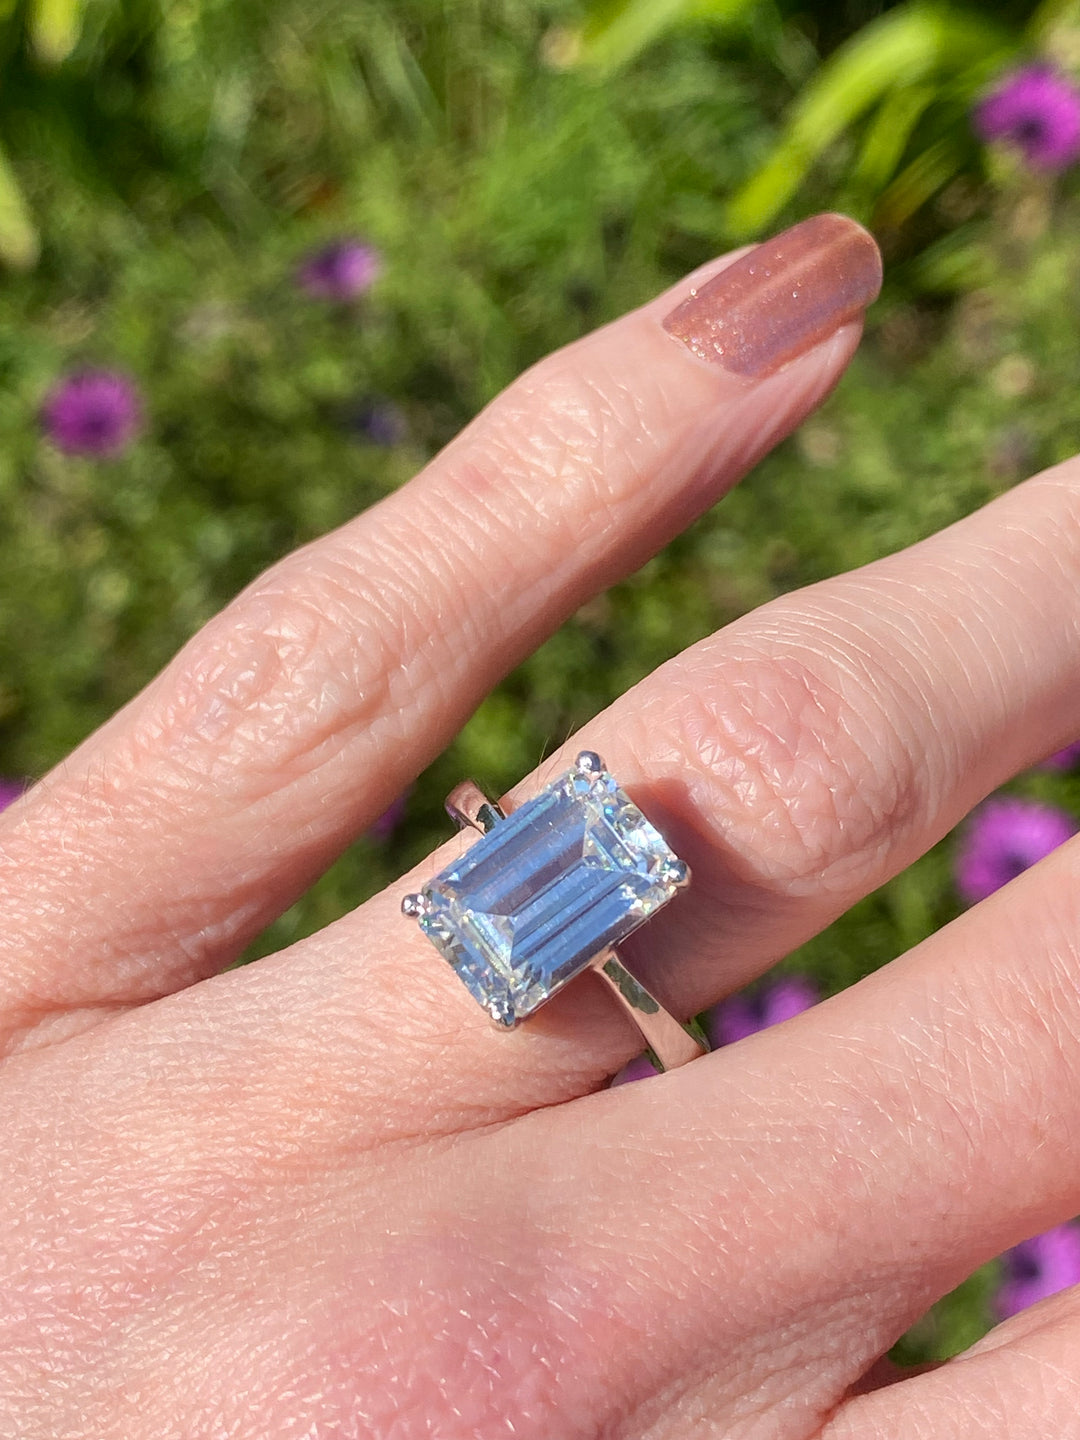 5 Carat Emerald Cut Moissanite Engagement Ring in Sterling Silver Katherine James Jewellery 